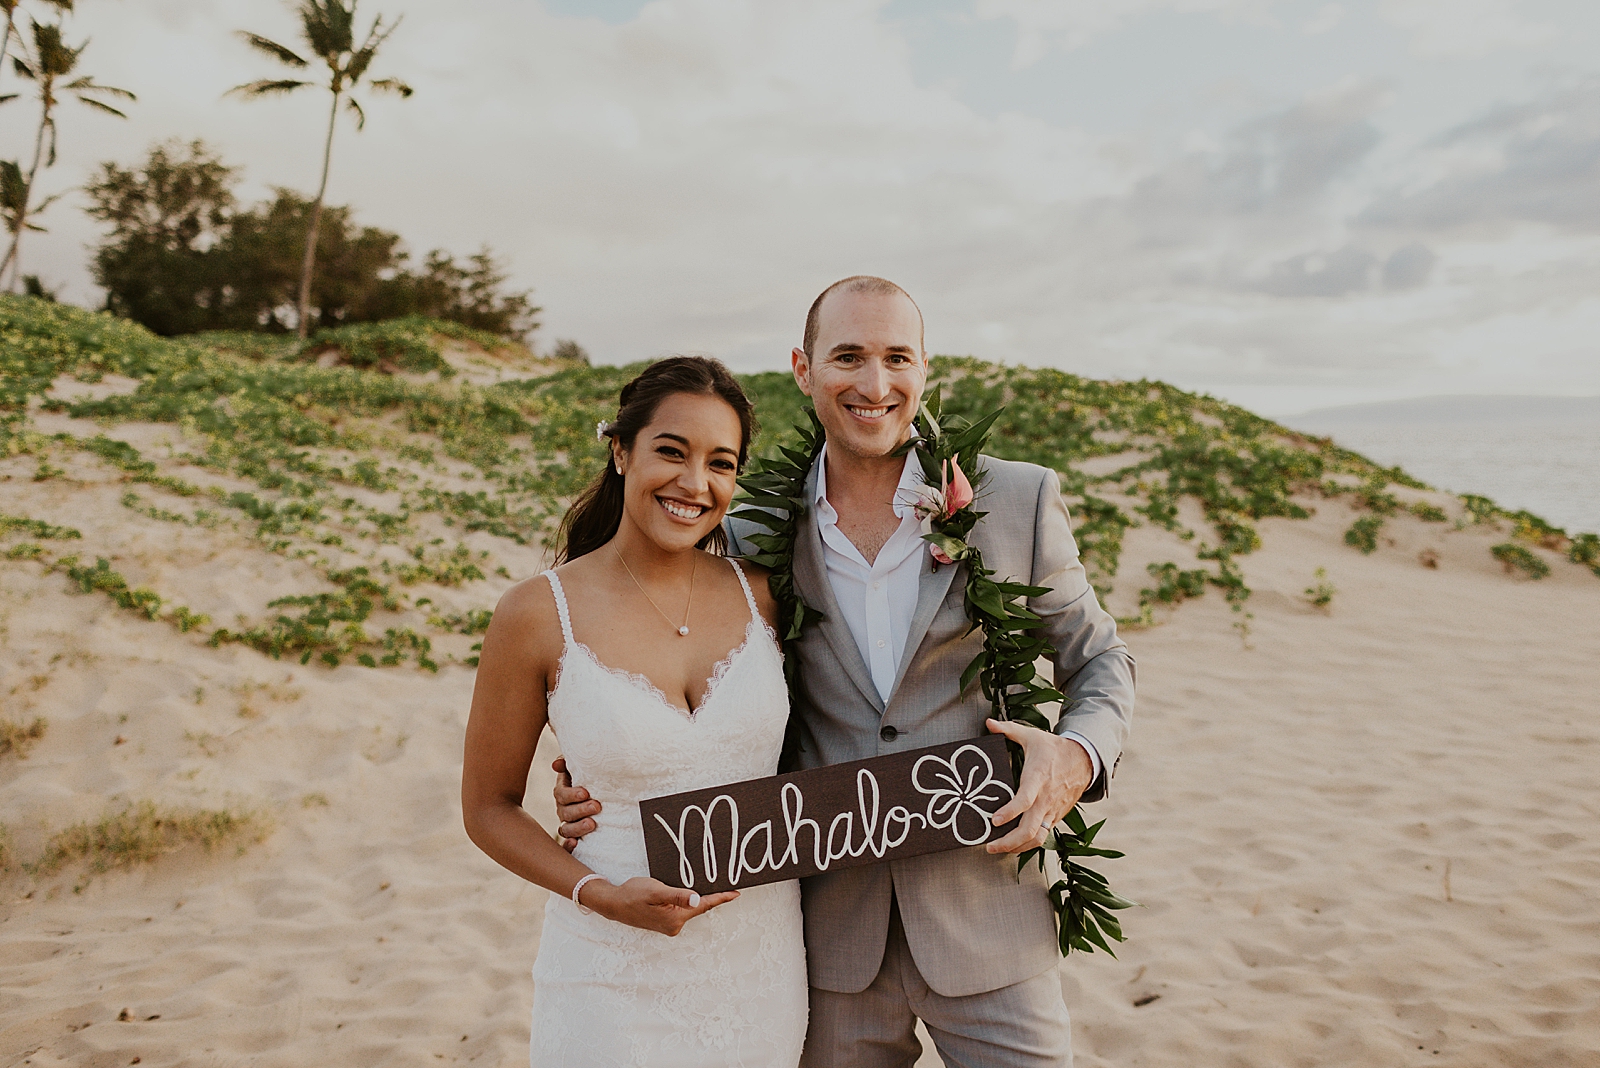 Bride and Groom portrait of them holding "Mahalo" sign on the beach